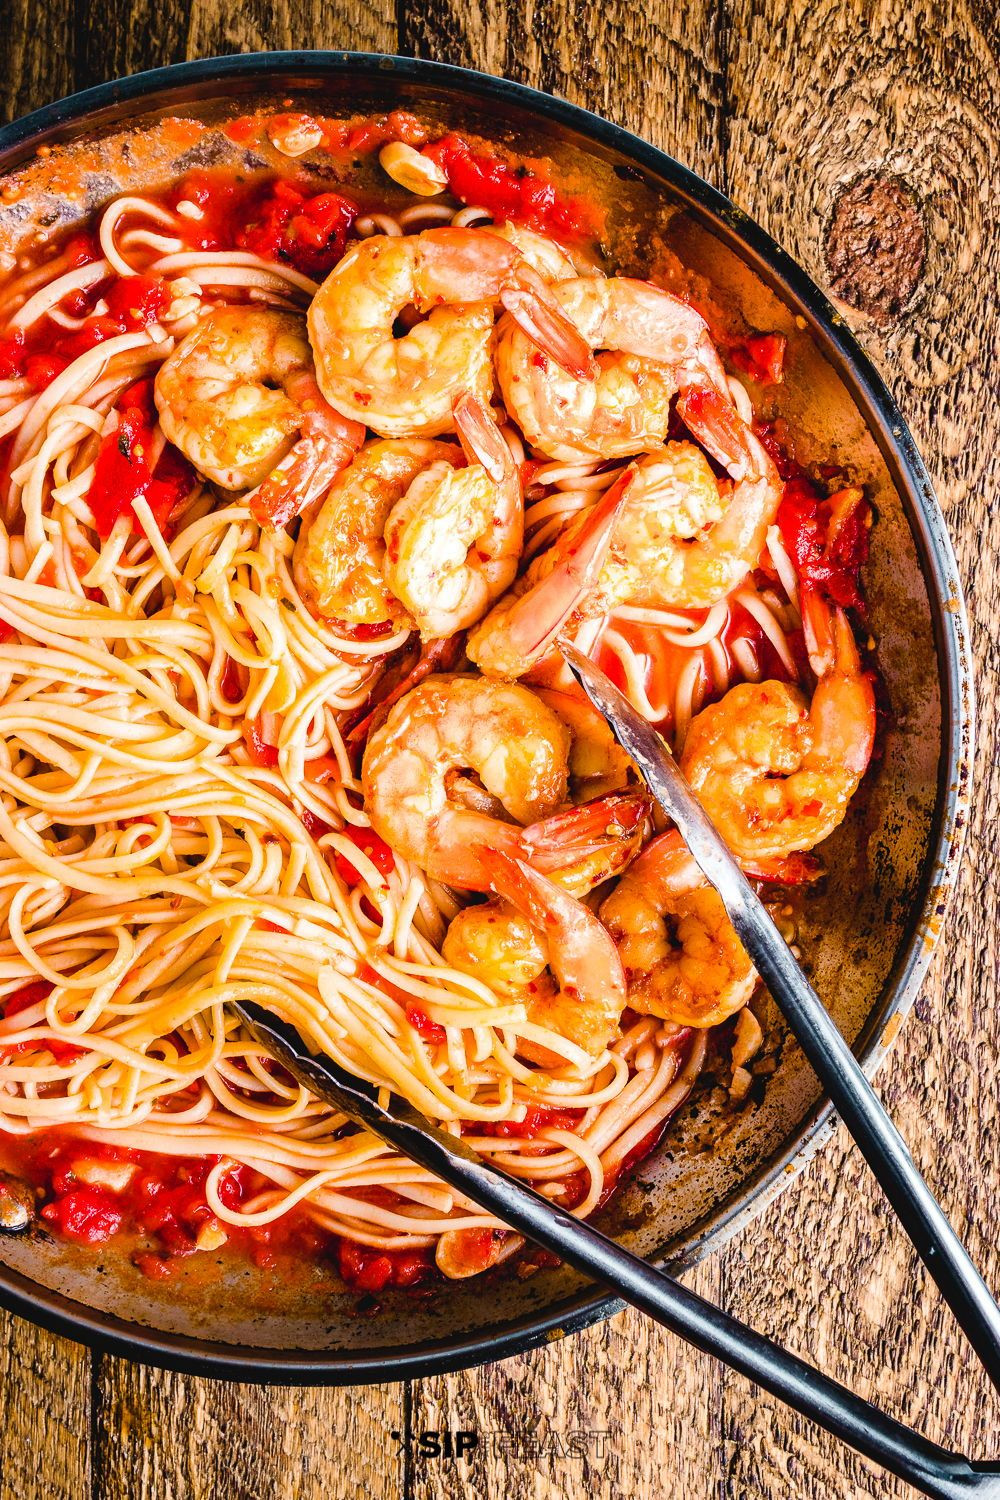 Spicy Shrimp Pasta With Red Sauce
 Shrimp Fra Diavolo with Linguine has just the right amount